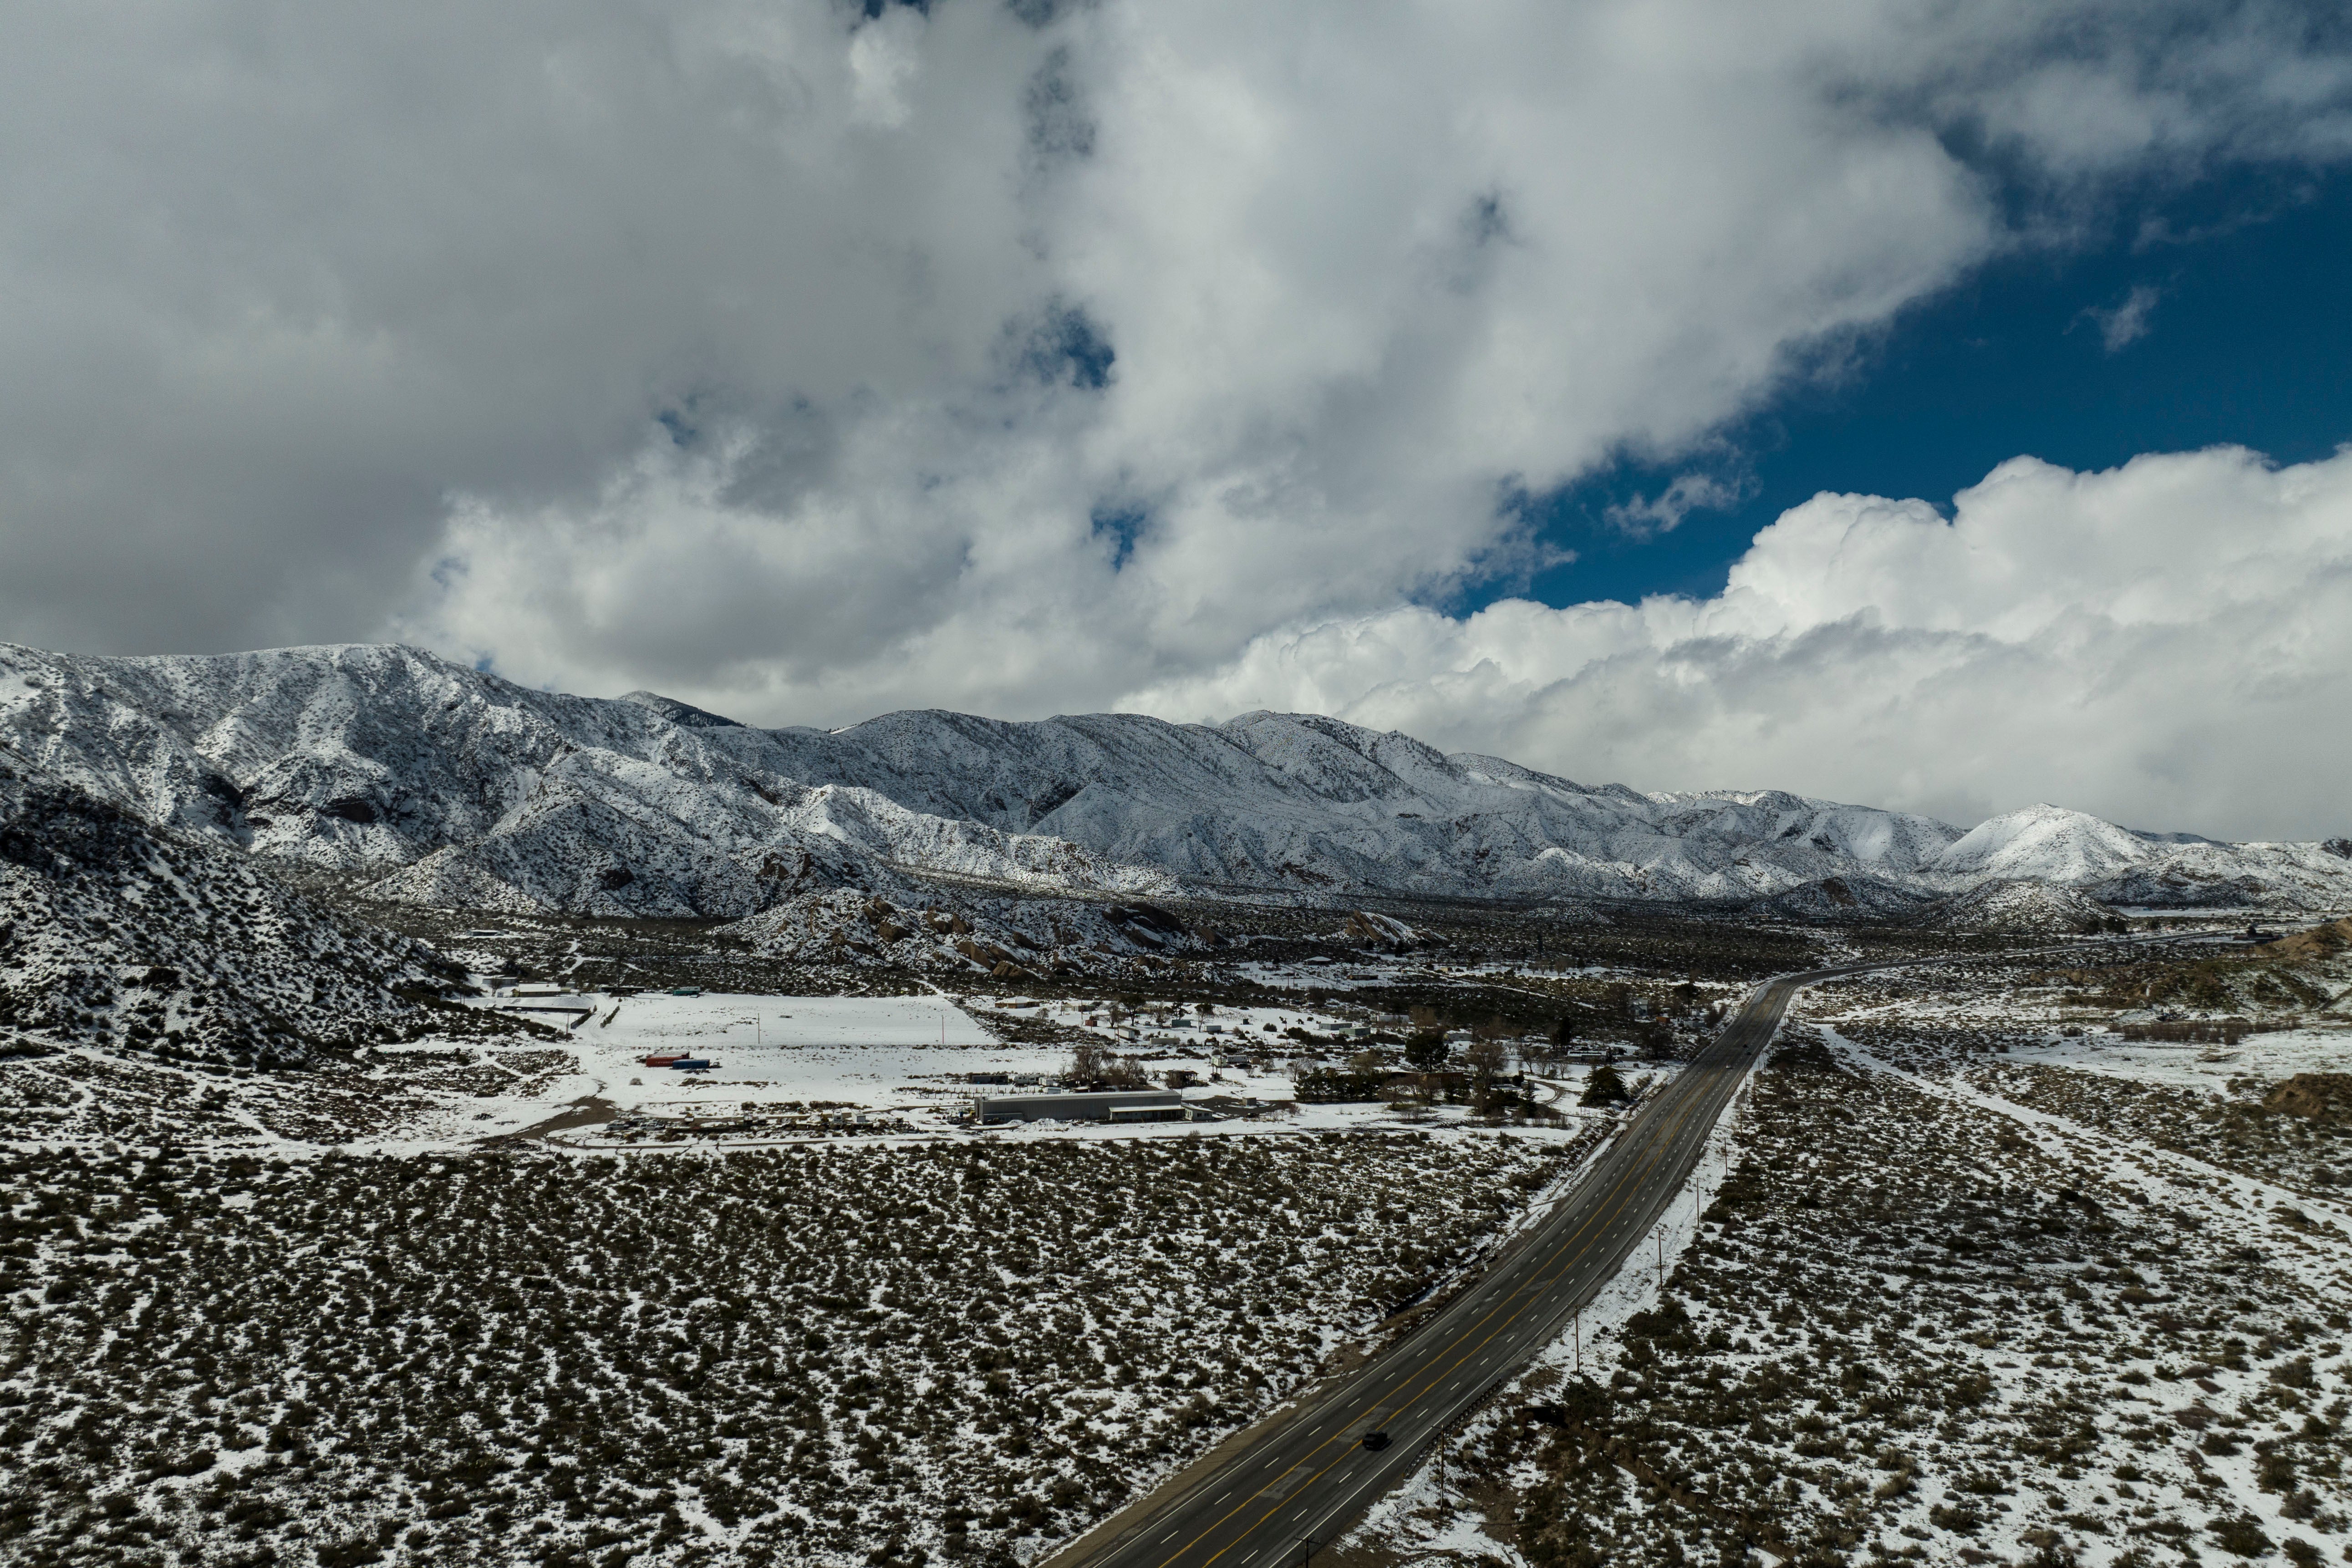 Clouds hover over snow-covered mountains as a car drives along a state route near Phelan, California on Wednesday, March 1, 2023. (Photo: Jae C. Hong, AP)